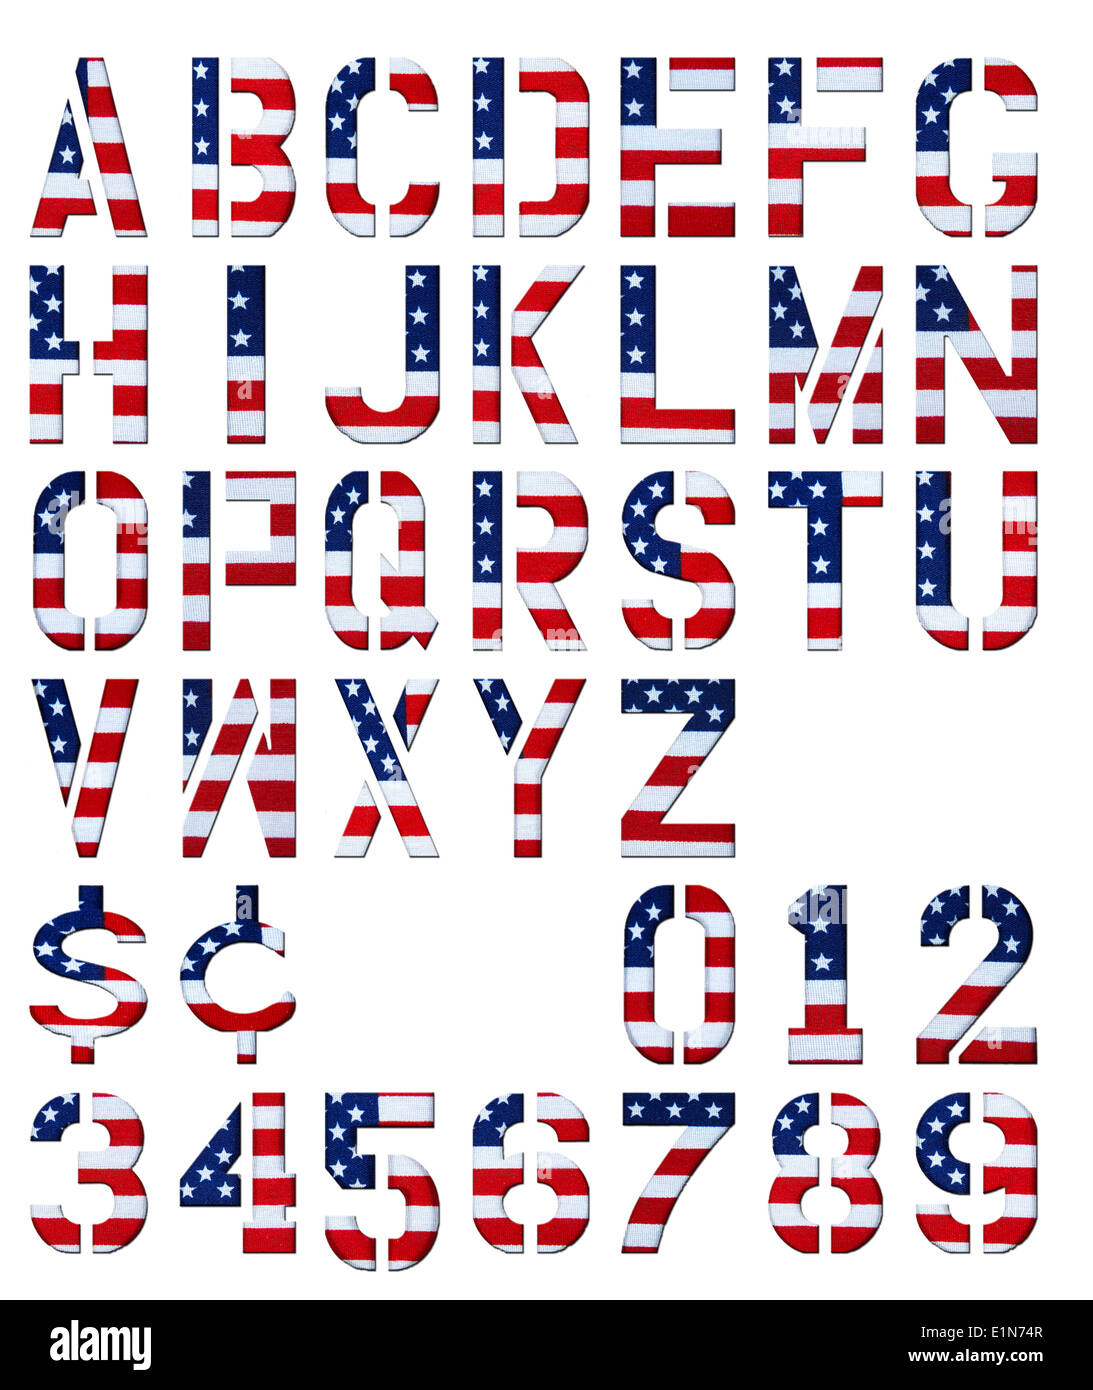 Letters, numbers and dollar & cent signs cut out from USA flag like those typically used in american politics. Stock Photo